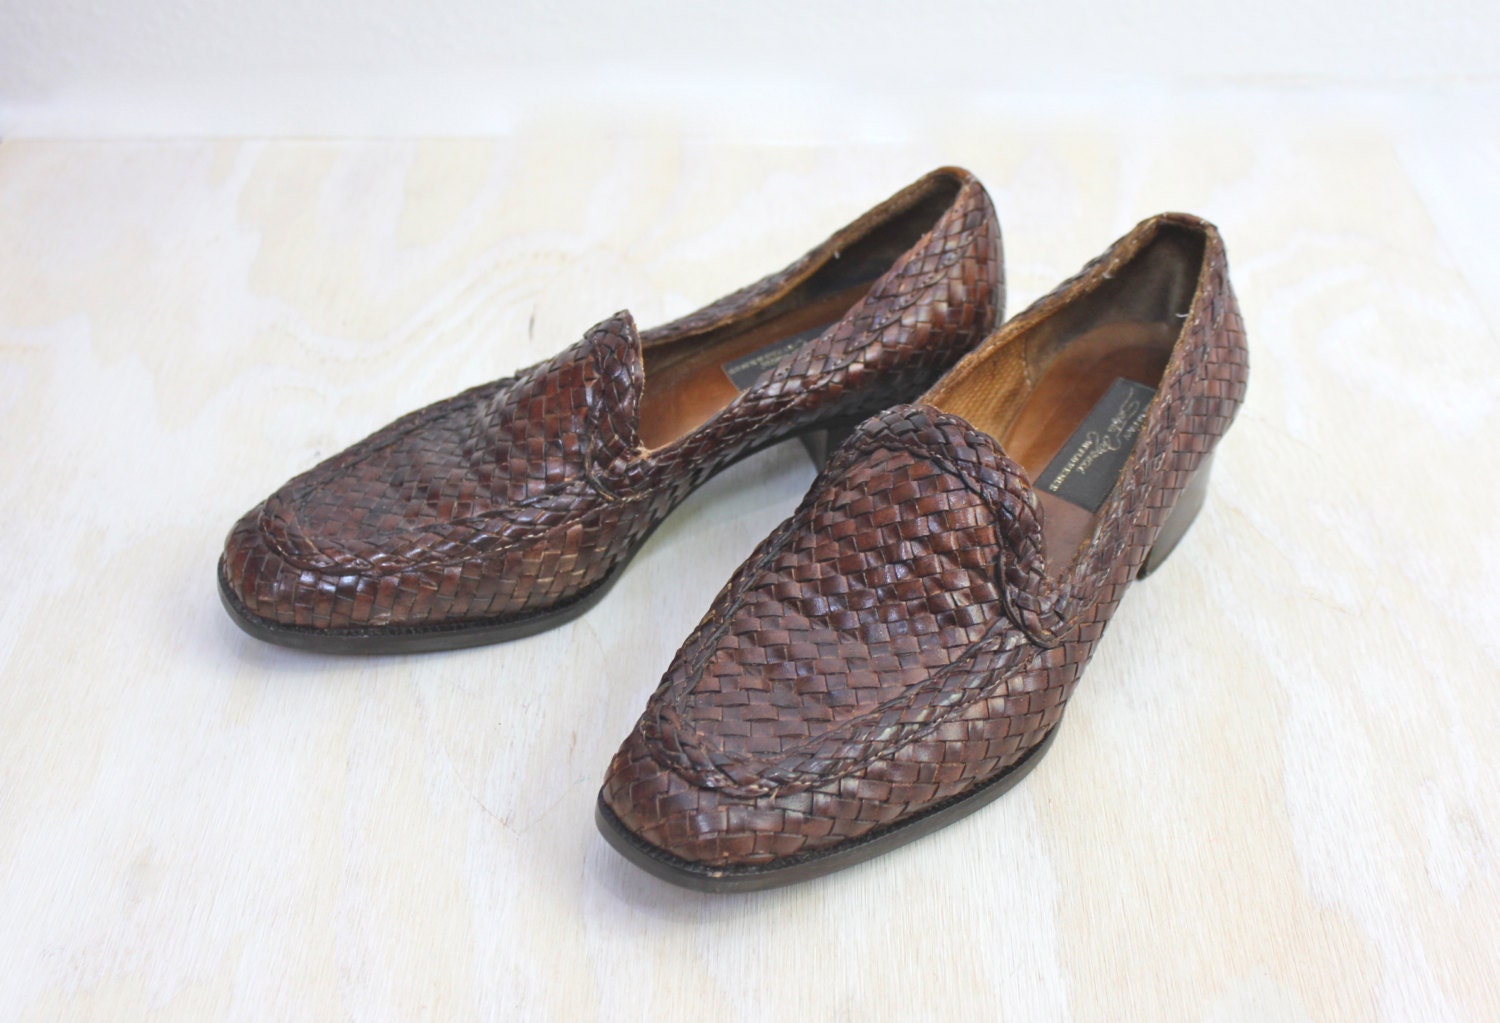 RESERVE Vintage Italian Woven Leather Loafers Sz 7.5